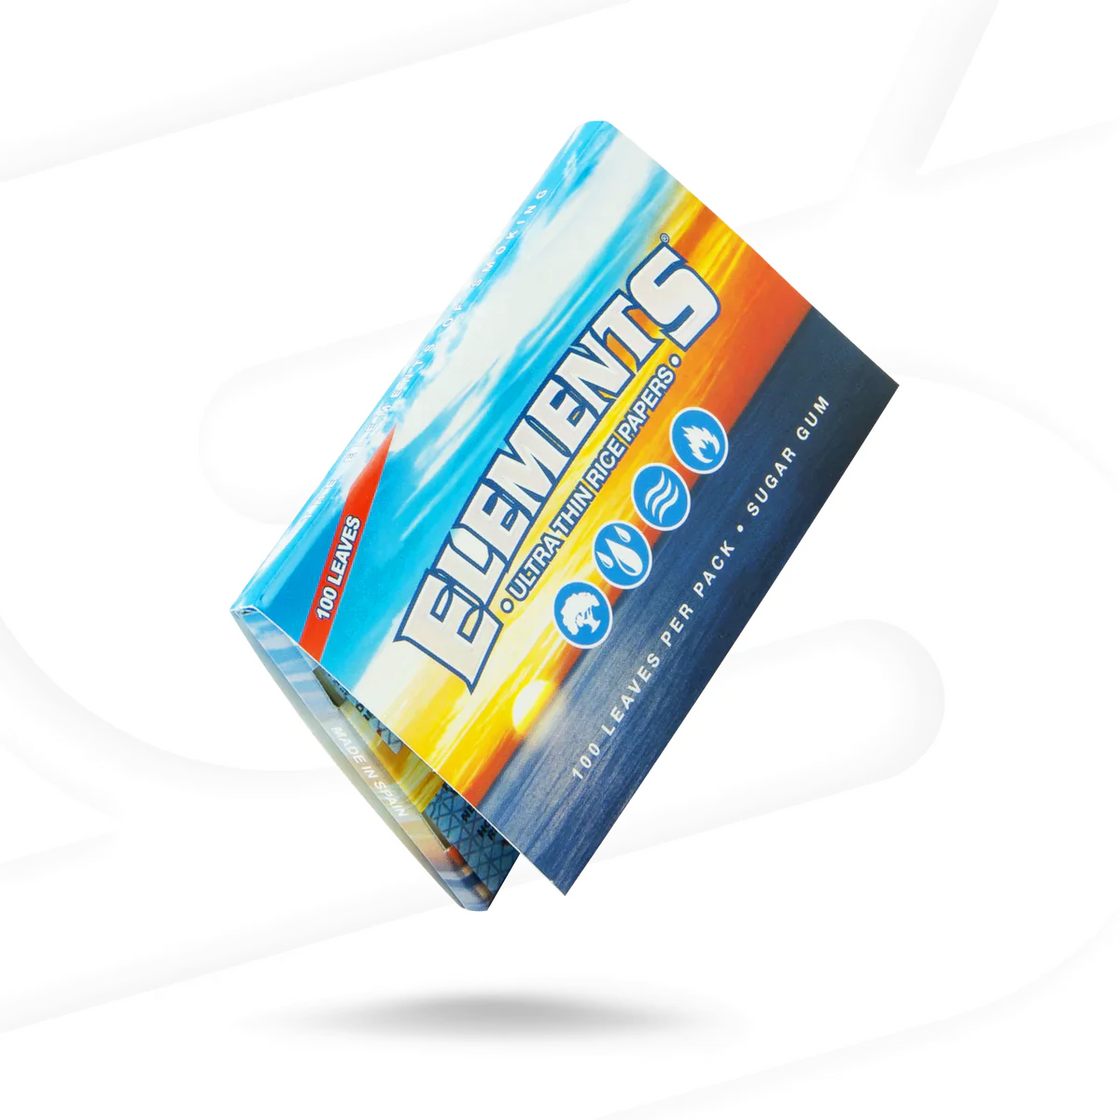 ELEMENTS SINGLE WIDE ROLLING PAPERS